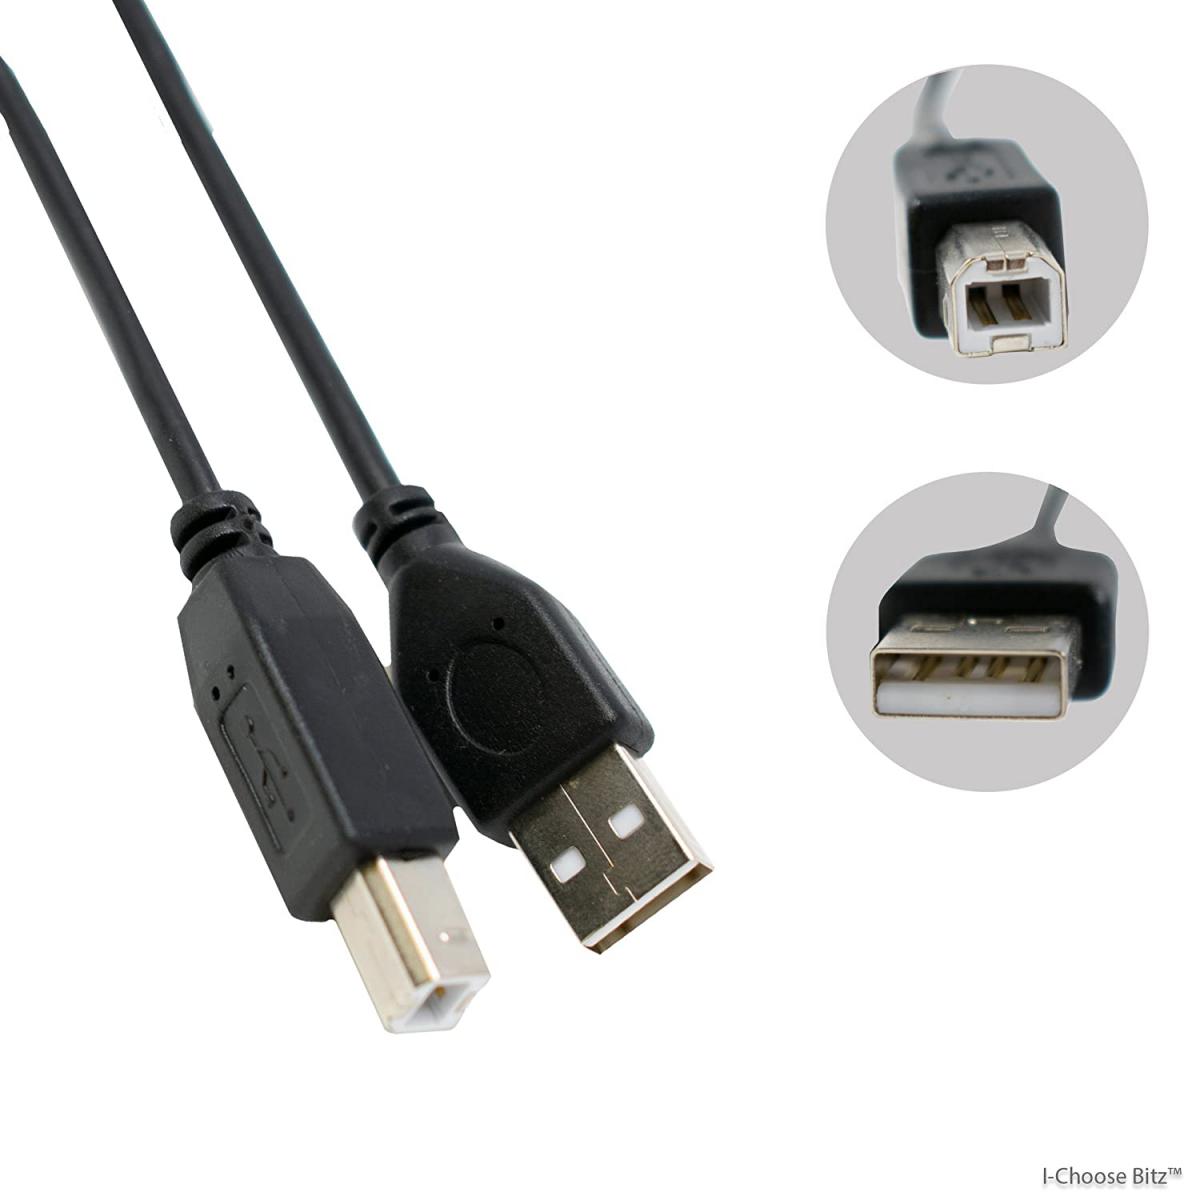 Ineck - INECK - Cable USB 2.0 A Male vers B Male Cable d